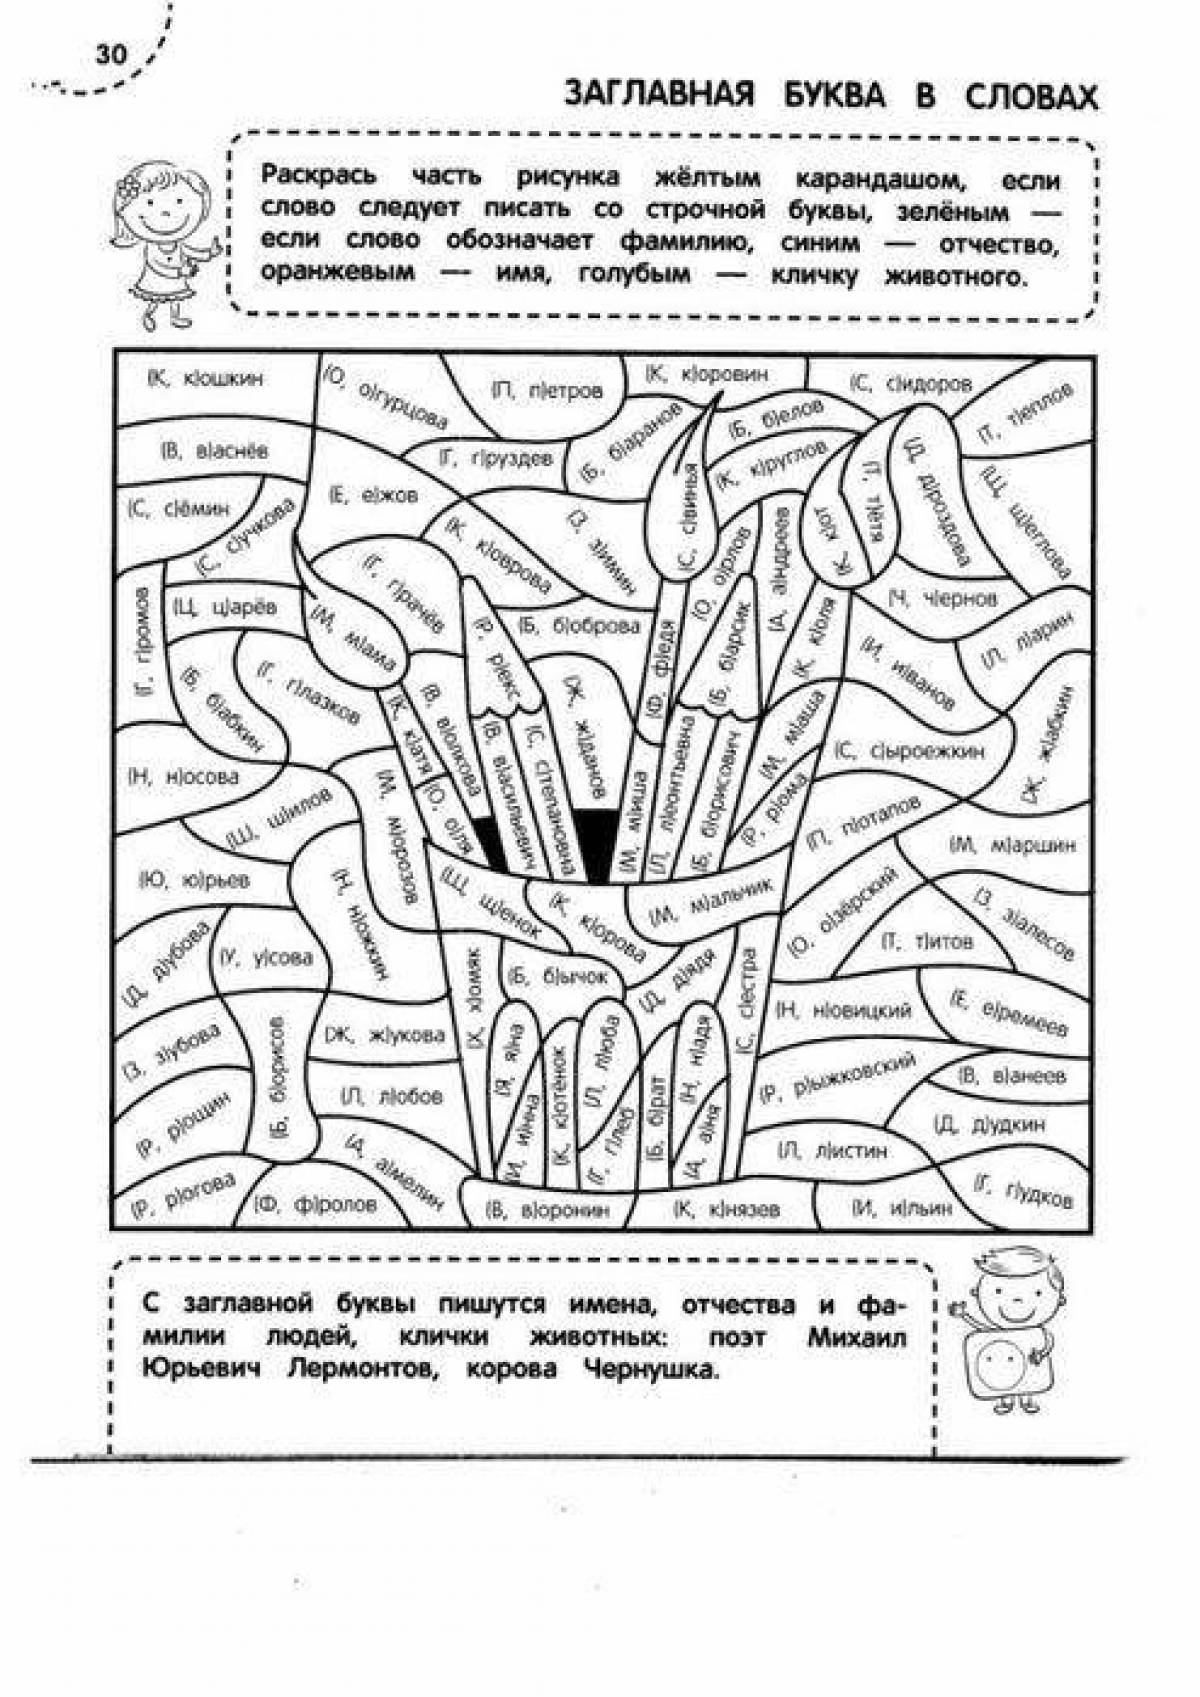 A fascinating coloring book in Russian for grade 1 with assignments